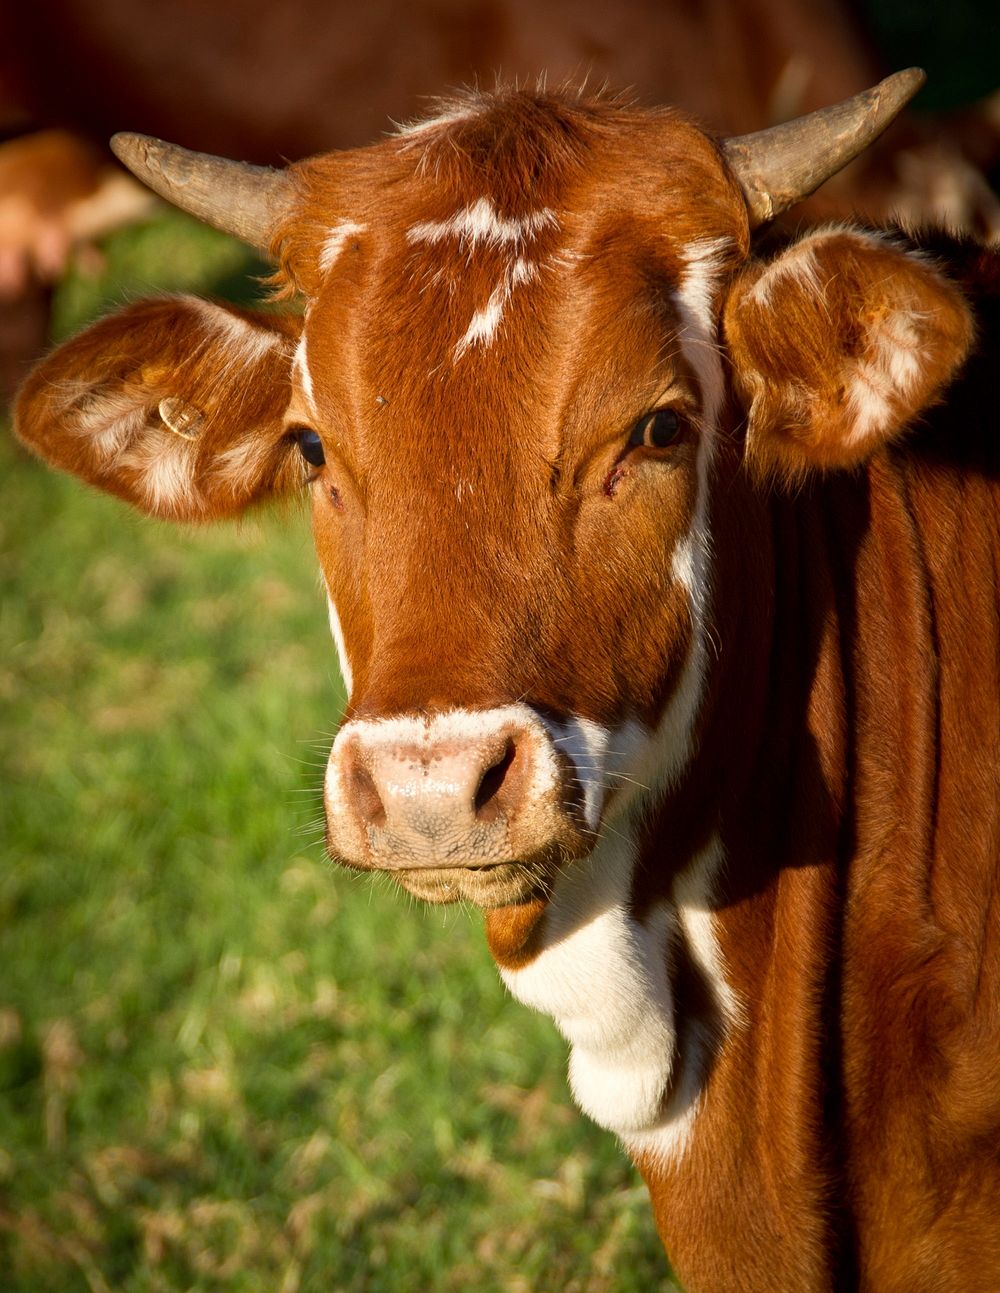 Free close up young cow's face image, public domain animal CC0 photo.